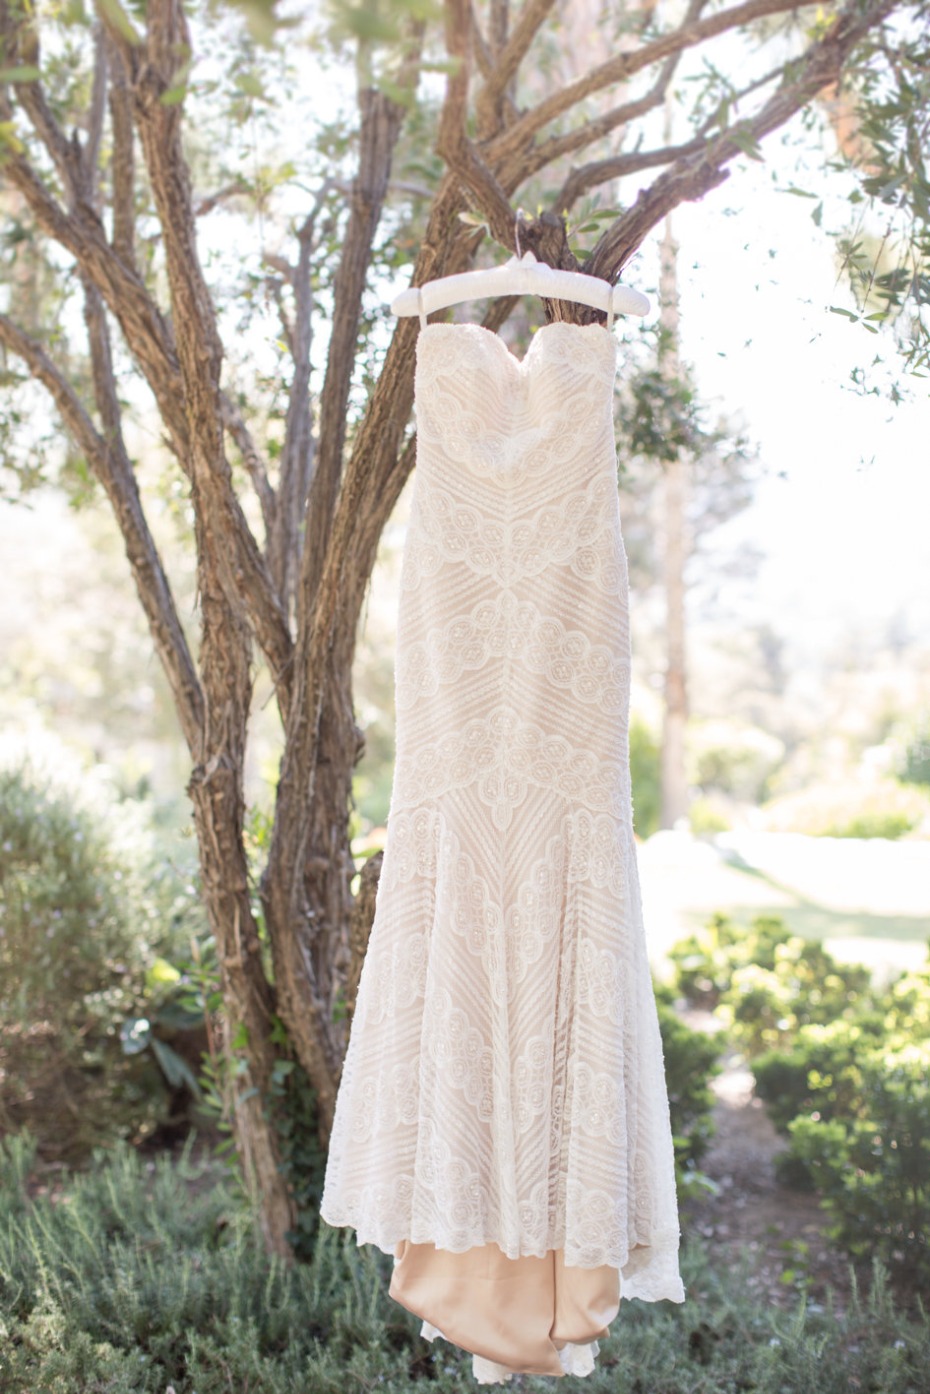 Gorgeous lace gown with blush underlay